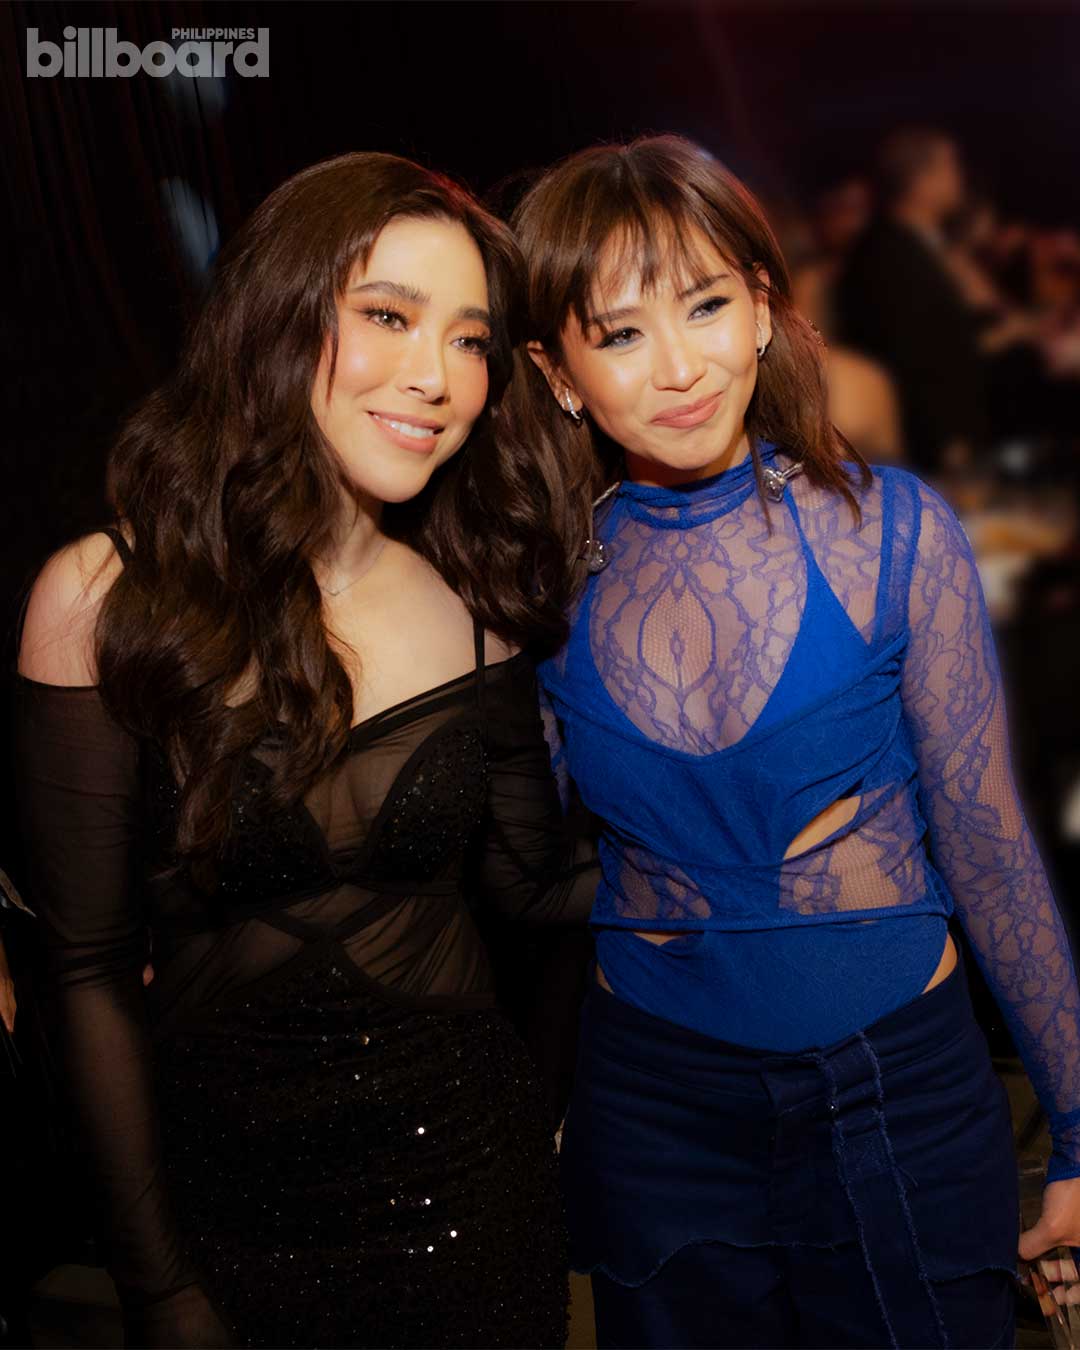 Moira with Sarah Geronimo at the Billboard Philippines Women in Music